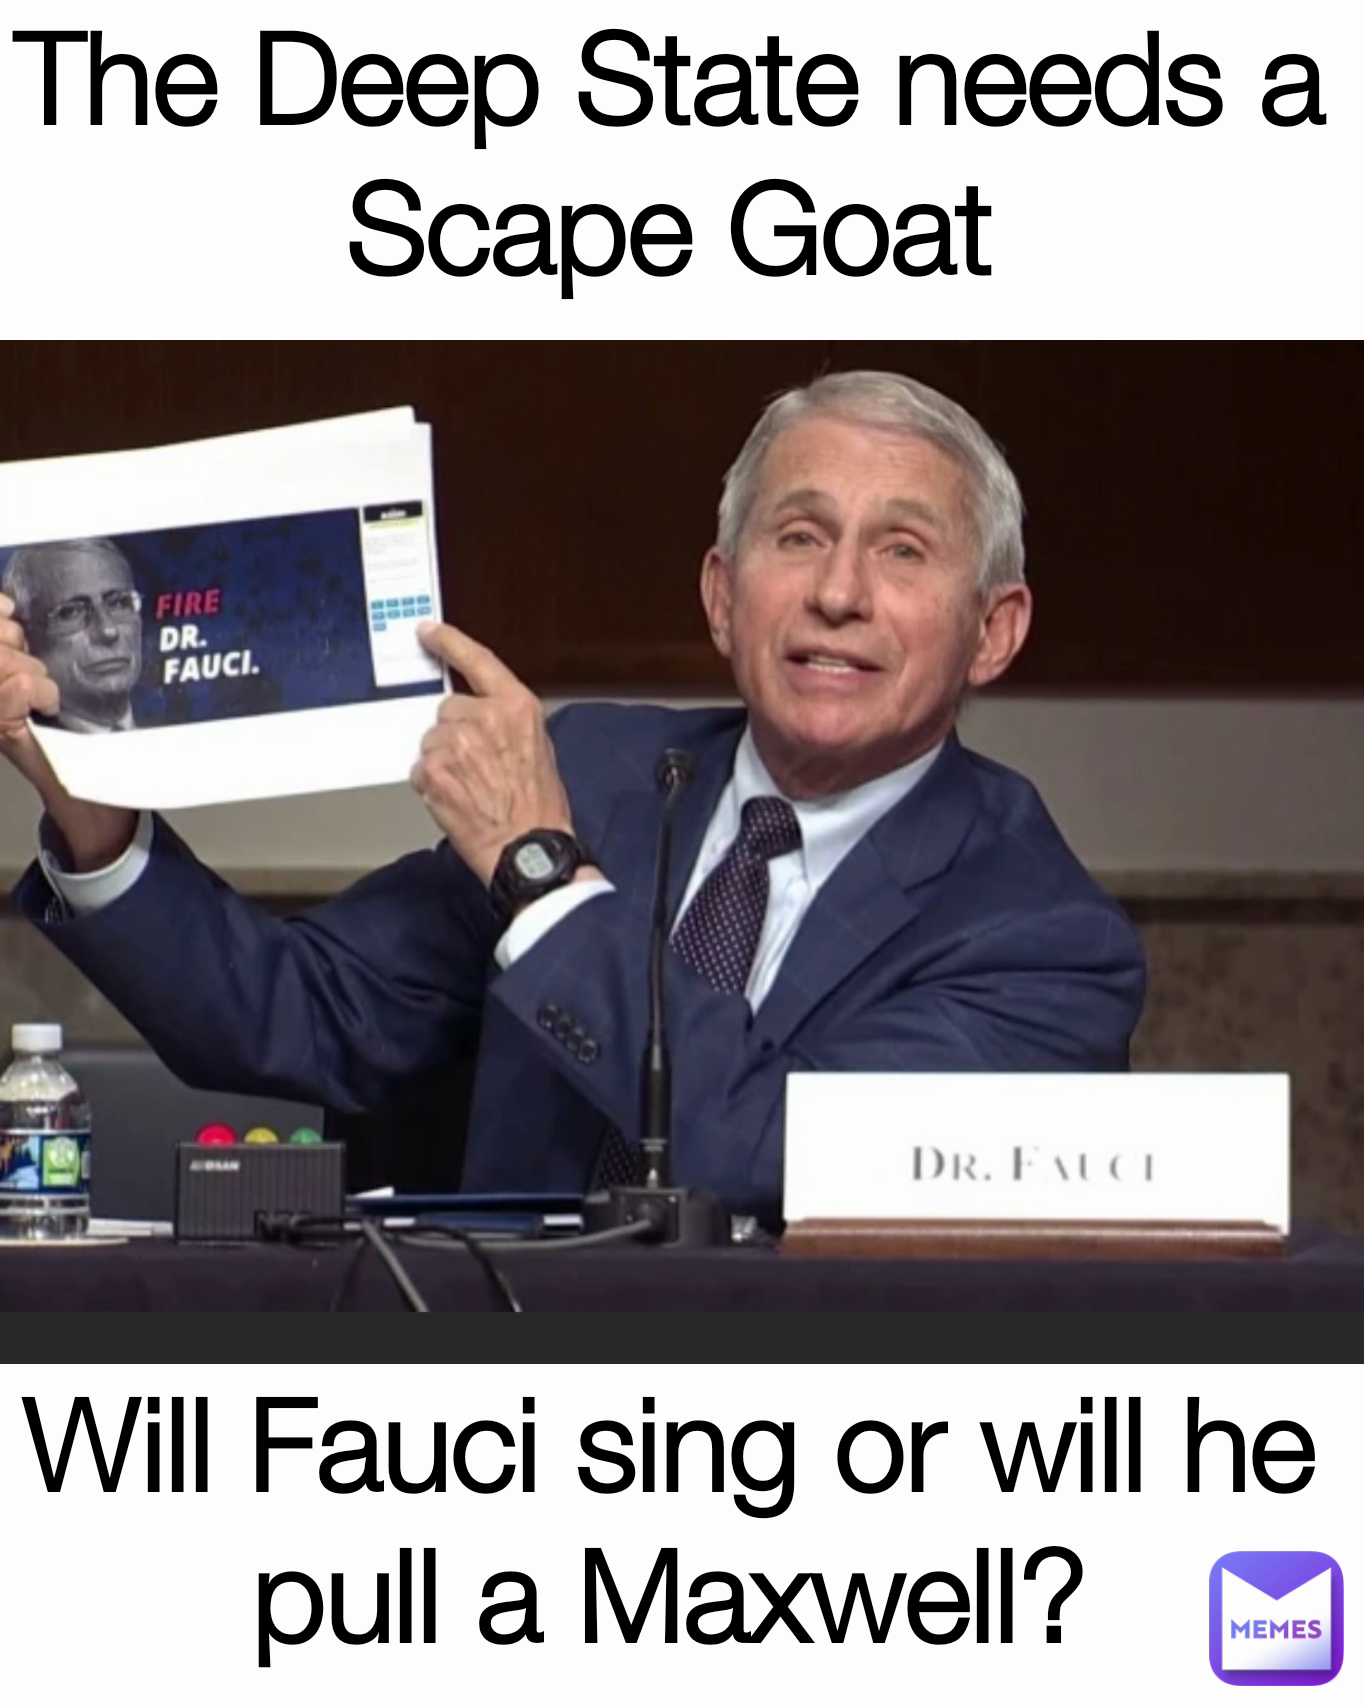 Will Fauci sing or will he pull a Maxwell? The Deep State needs a Scape Goat